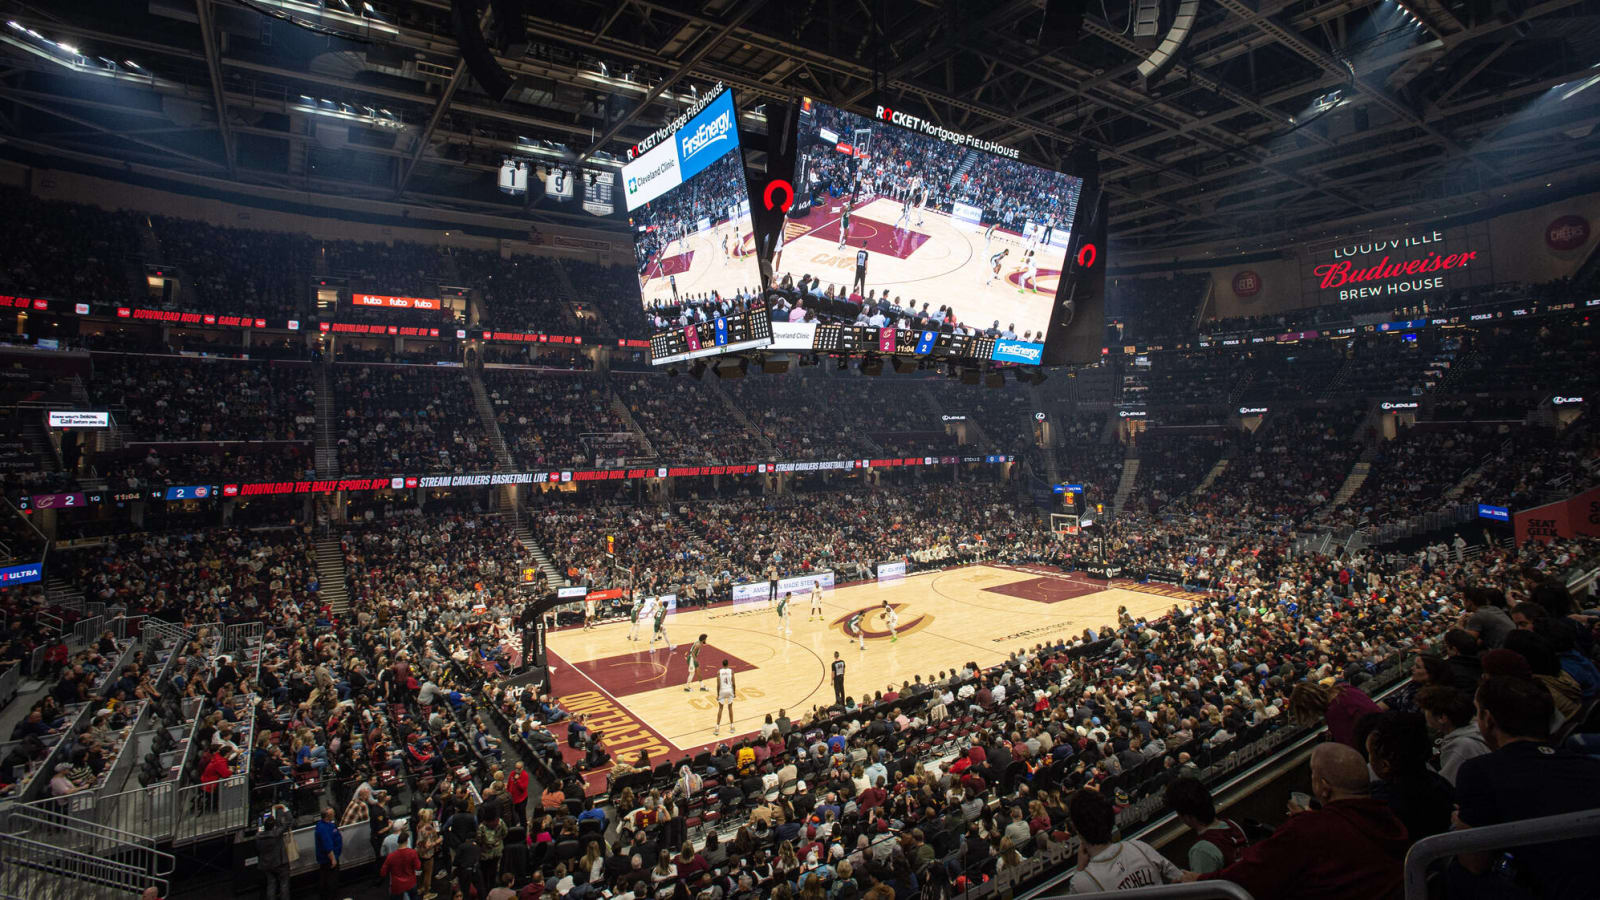 Report reveals concerns Heat had about Cavaliers' court